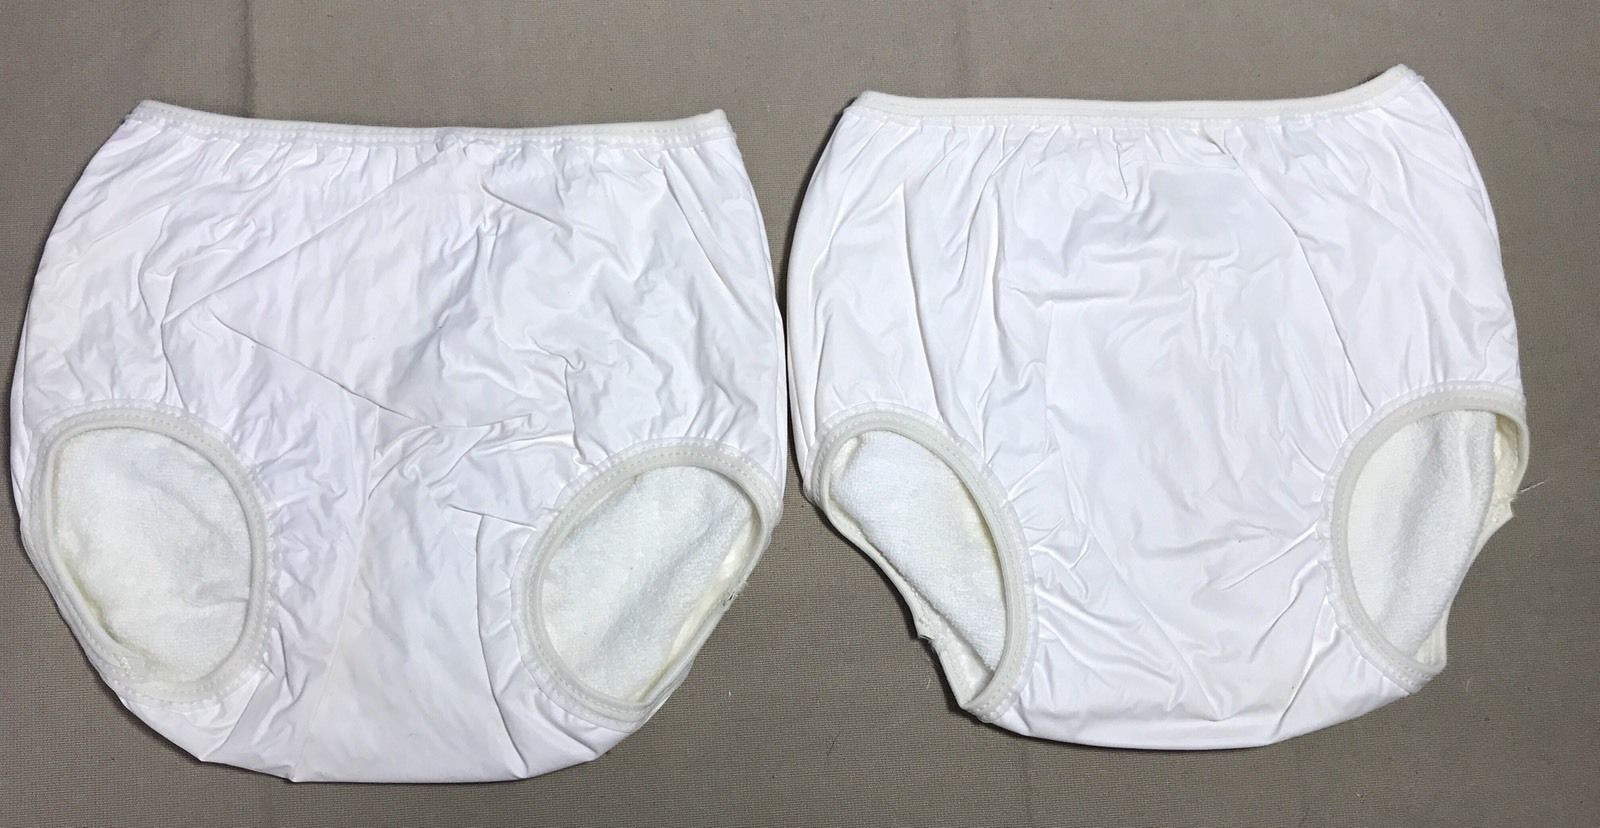 Adult diaper and rubber pants